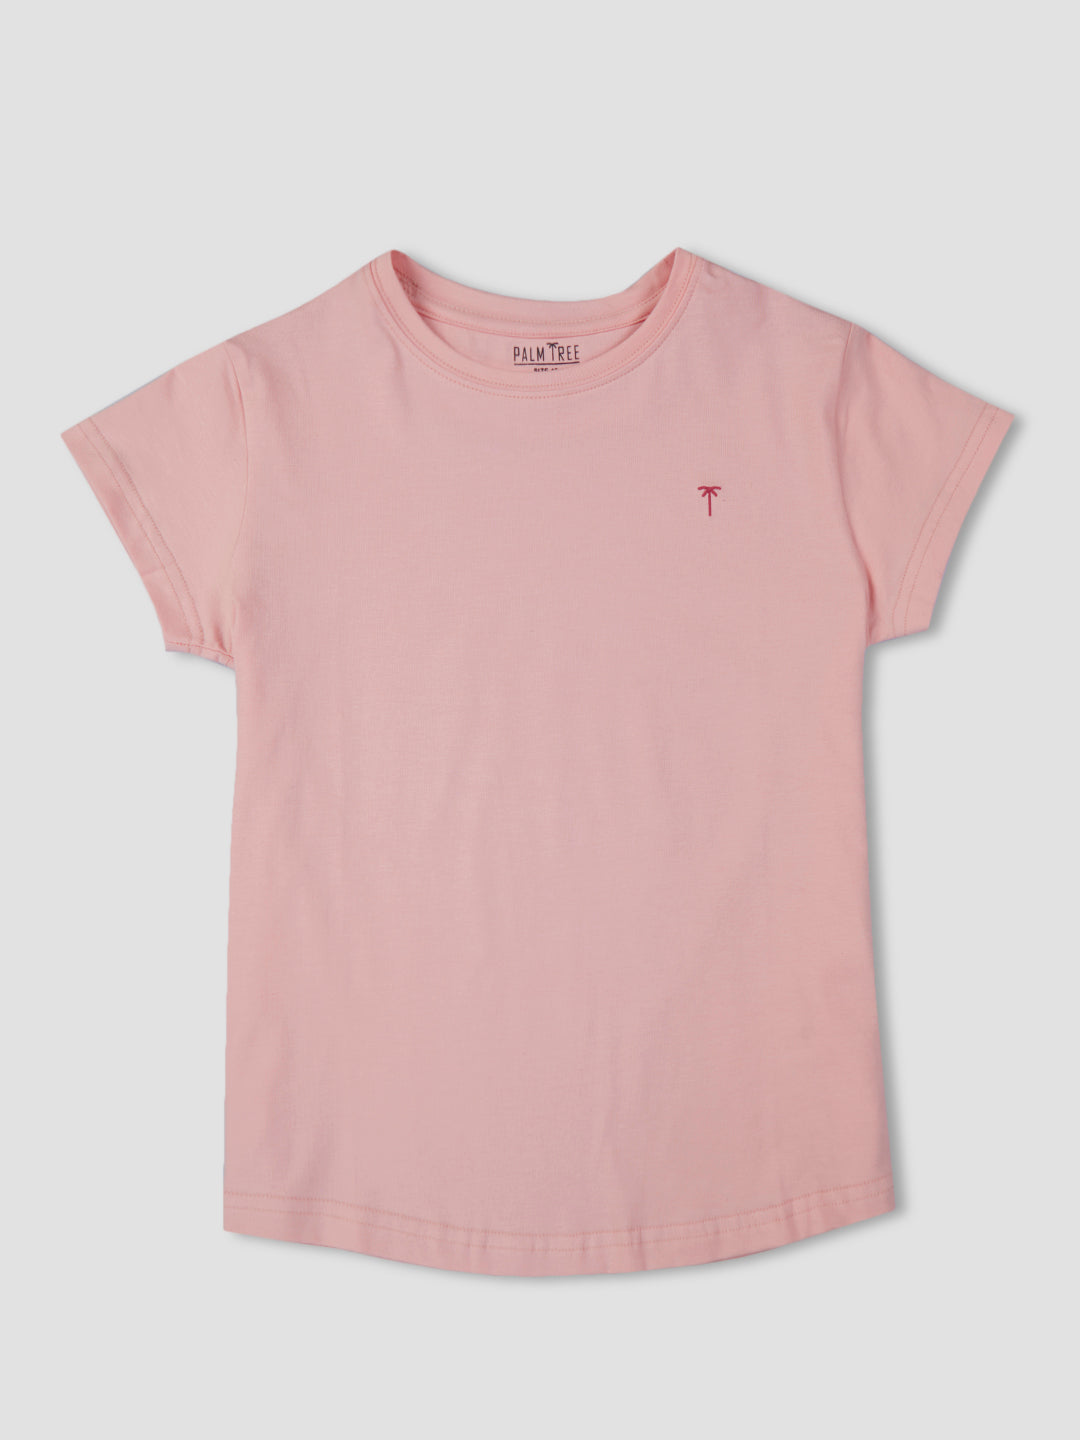 Girls Peach Solid Cotton Knits Top